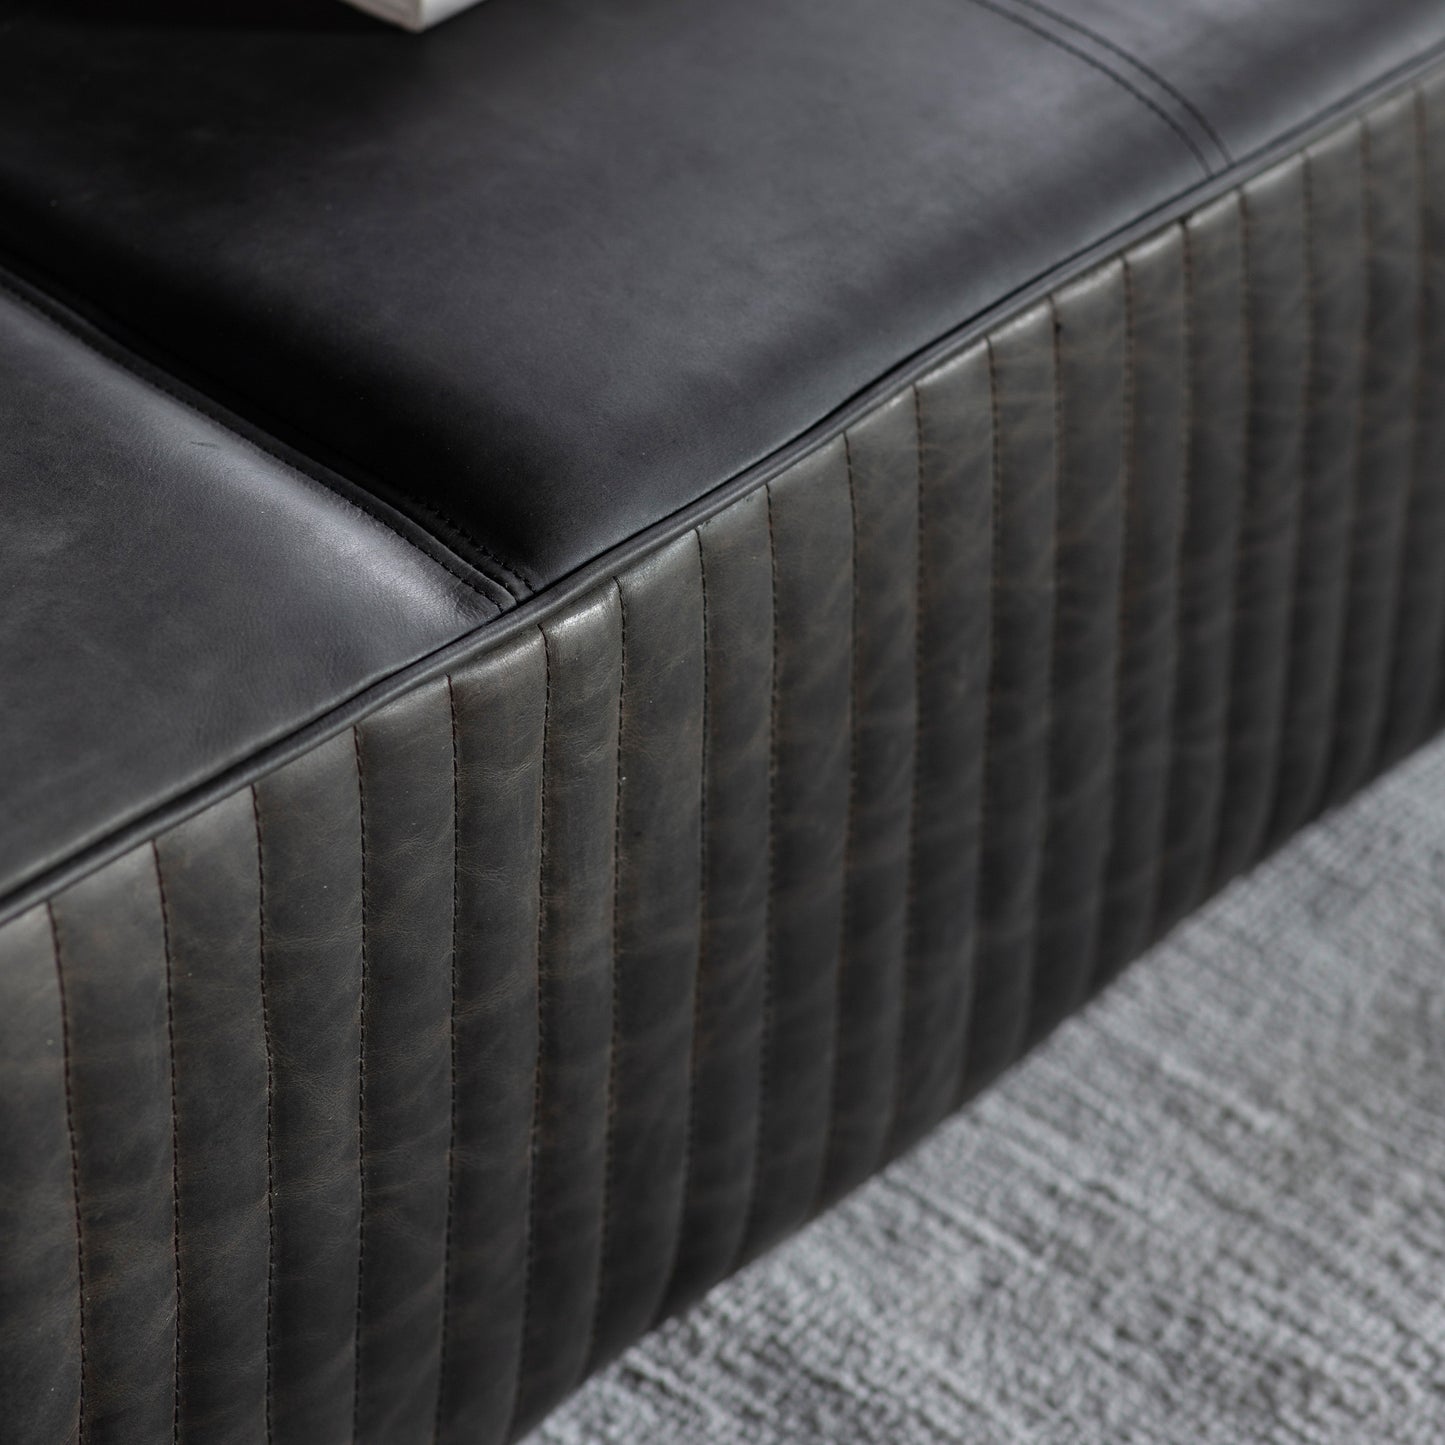 A close up of a Kikiathome.co.uk Cornwood Slab Black Leather 1200x1200x300mm couch for interior decor.